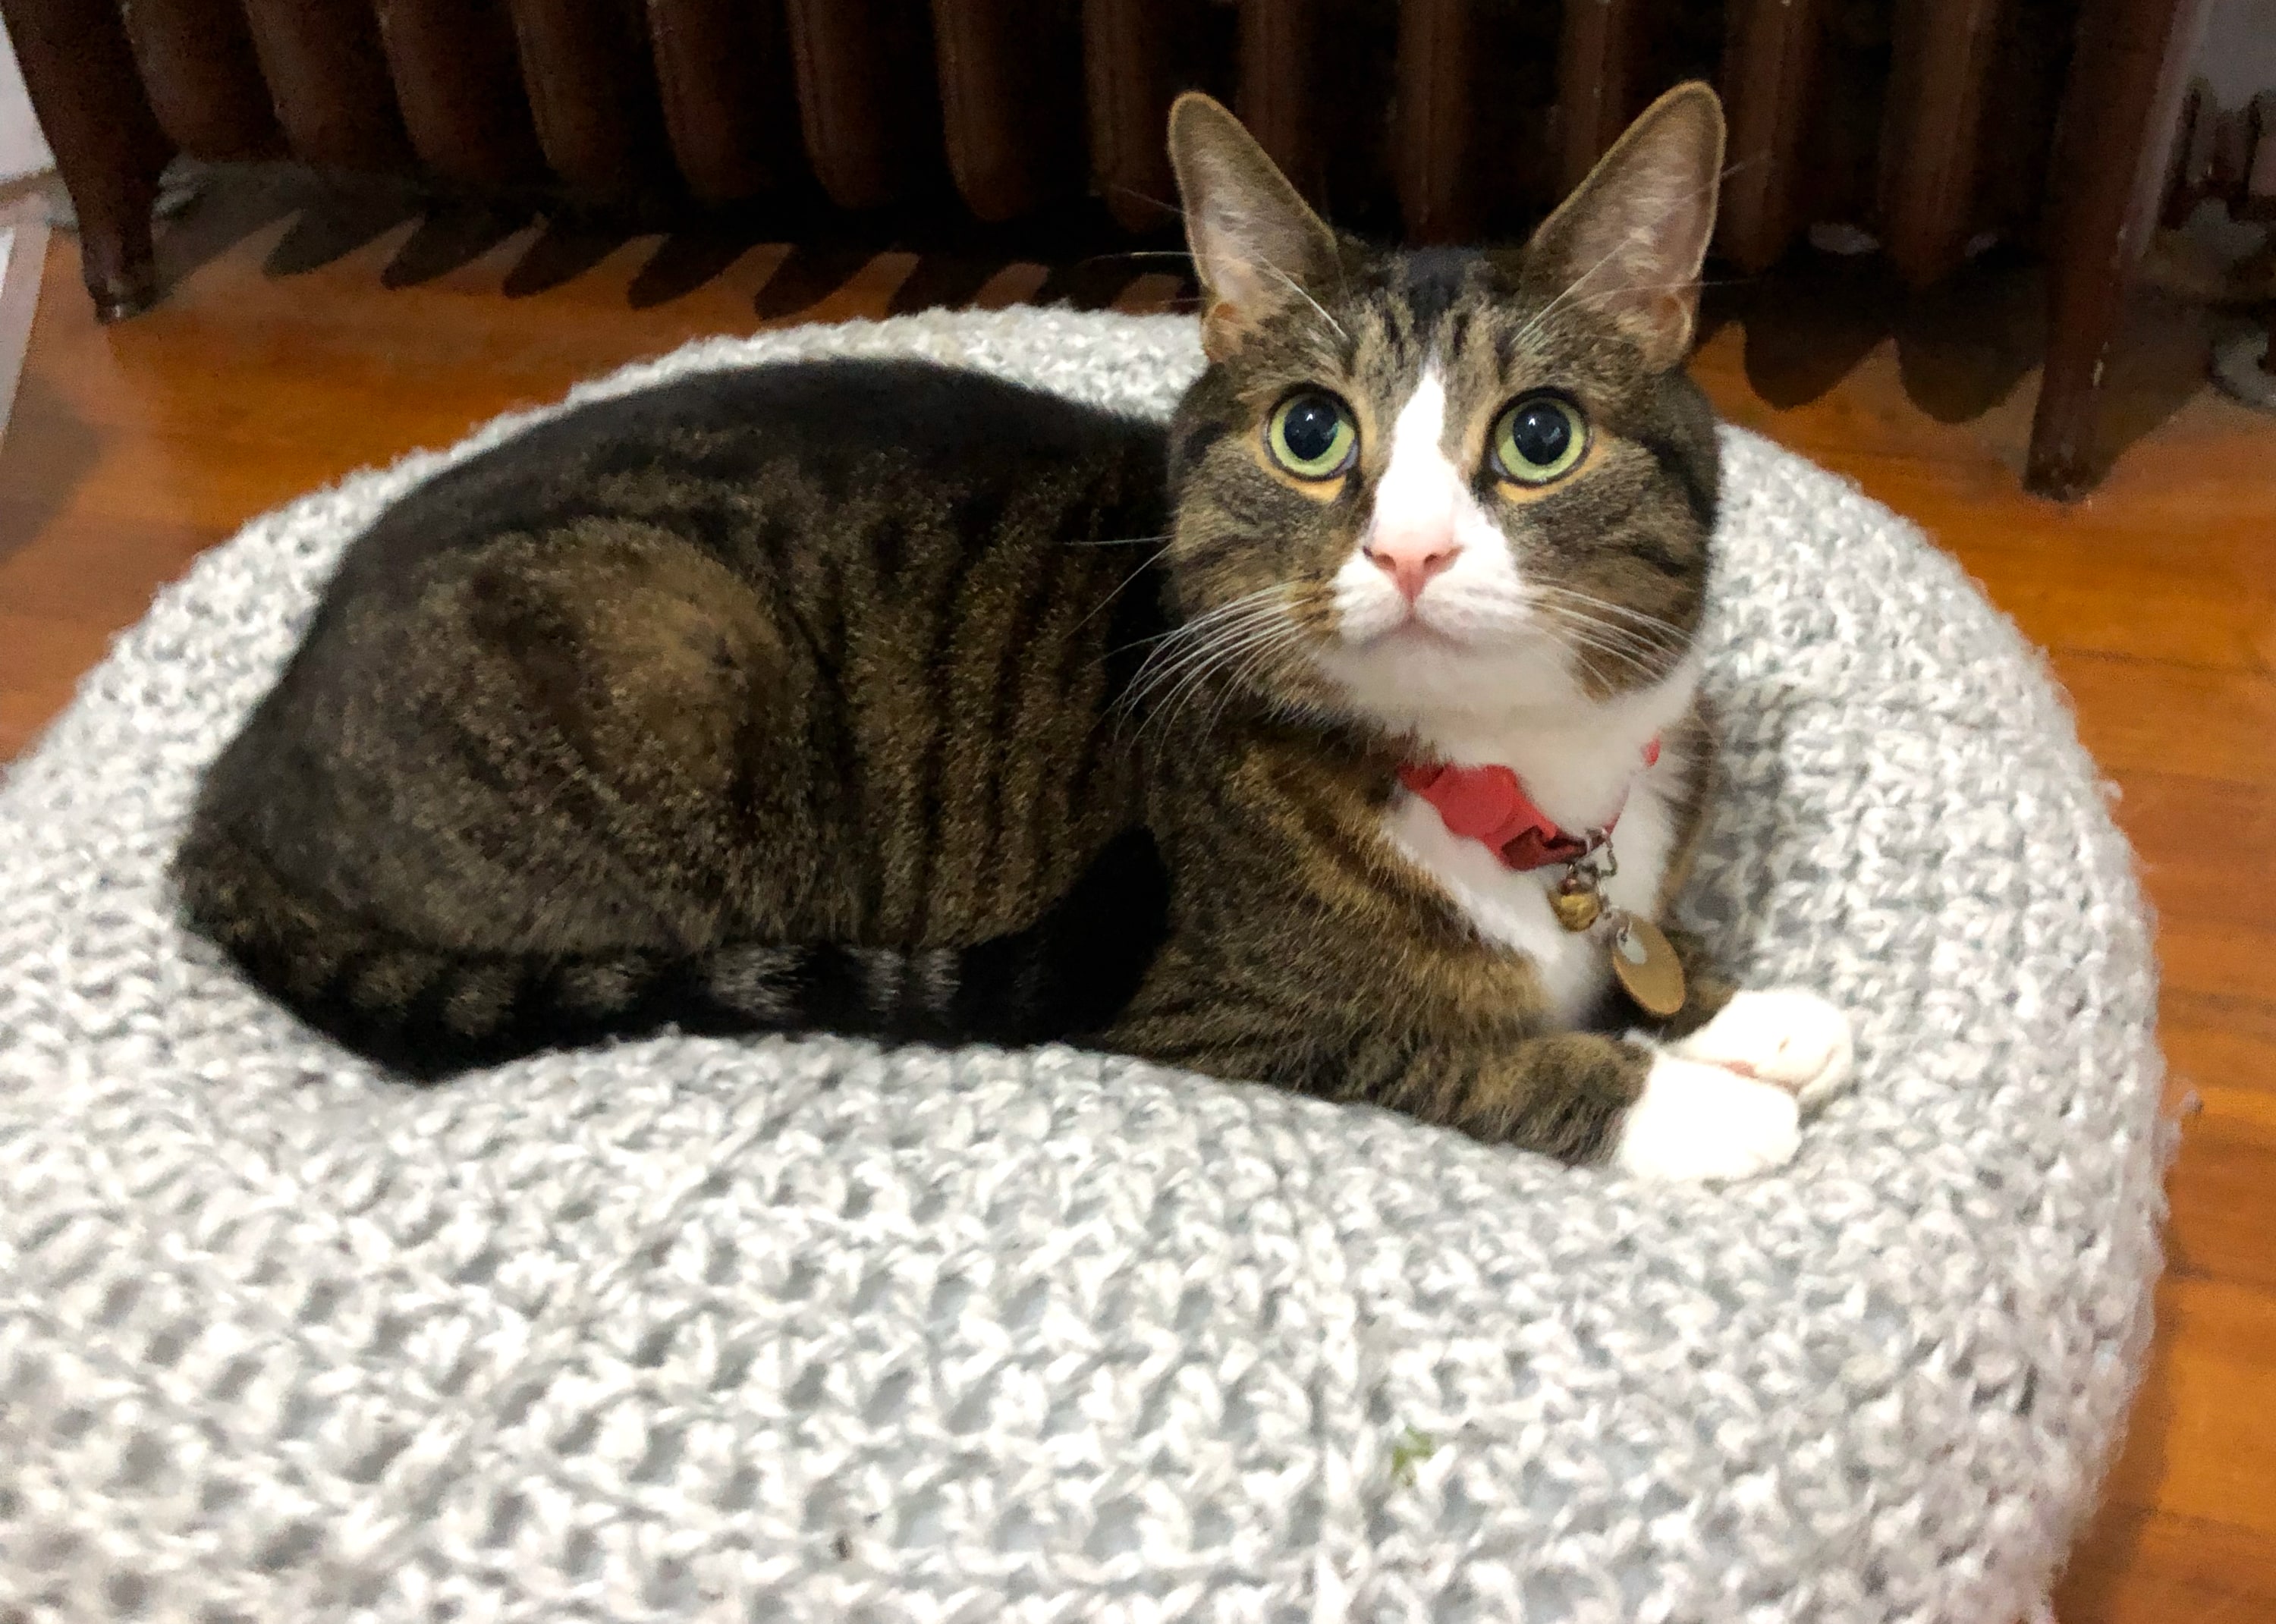 A cute stripey cat with white paws, a pink nose, and a red collar. He's staring up at the camera white sitting on top of a small knit ball.